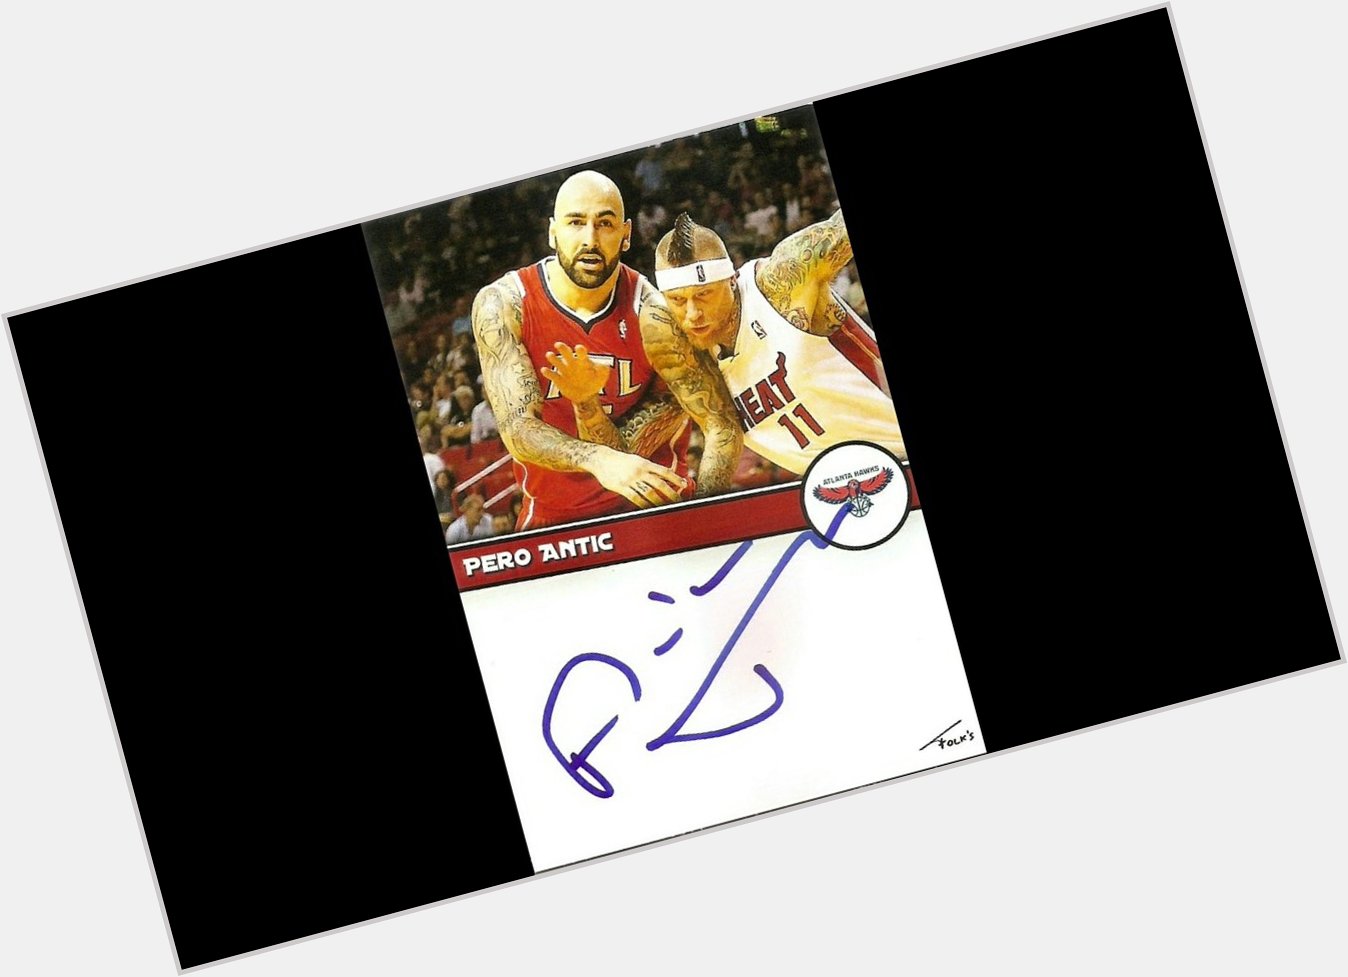 Happy Birthday to Pero Antic who turns 35 today.  Enjoy your day 